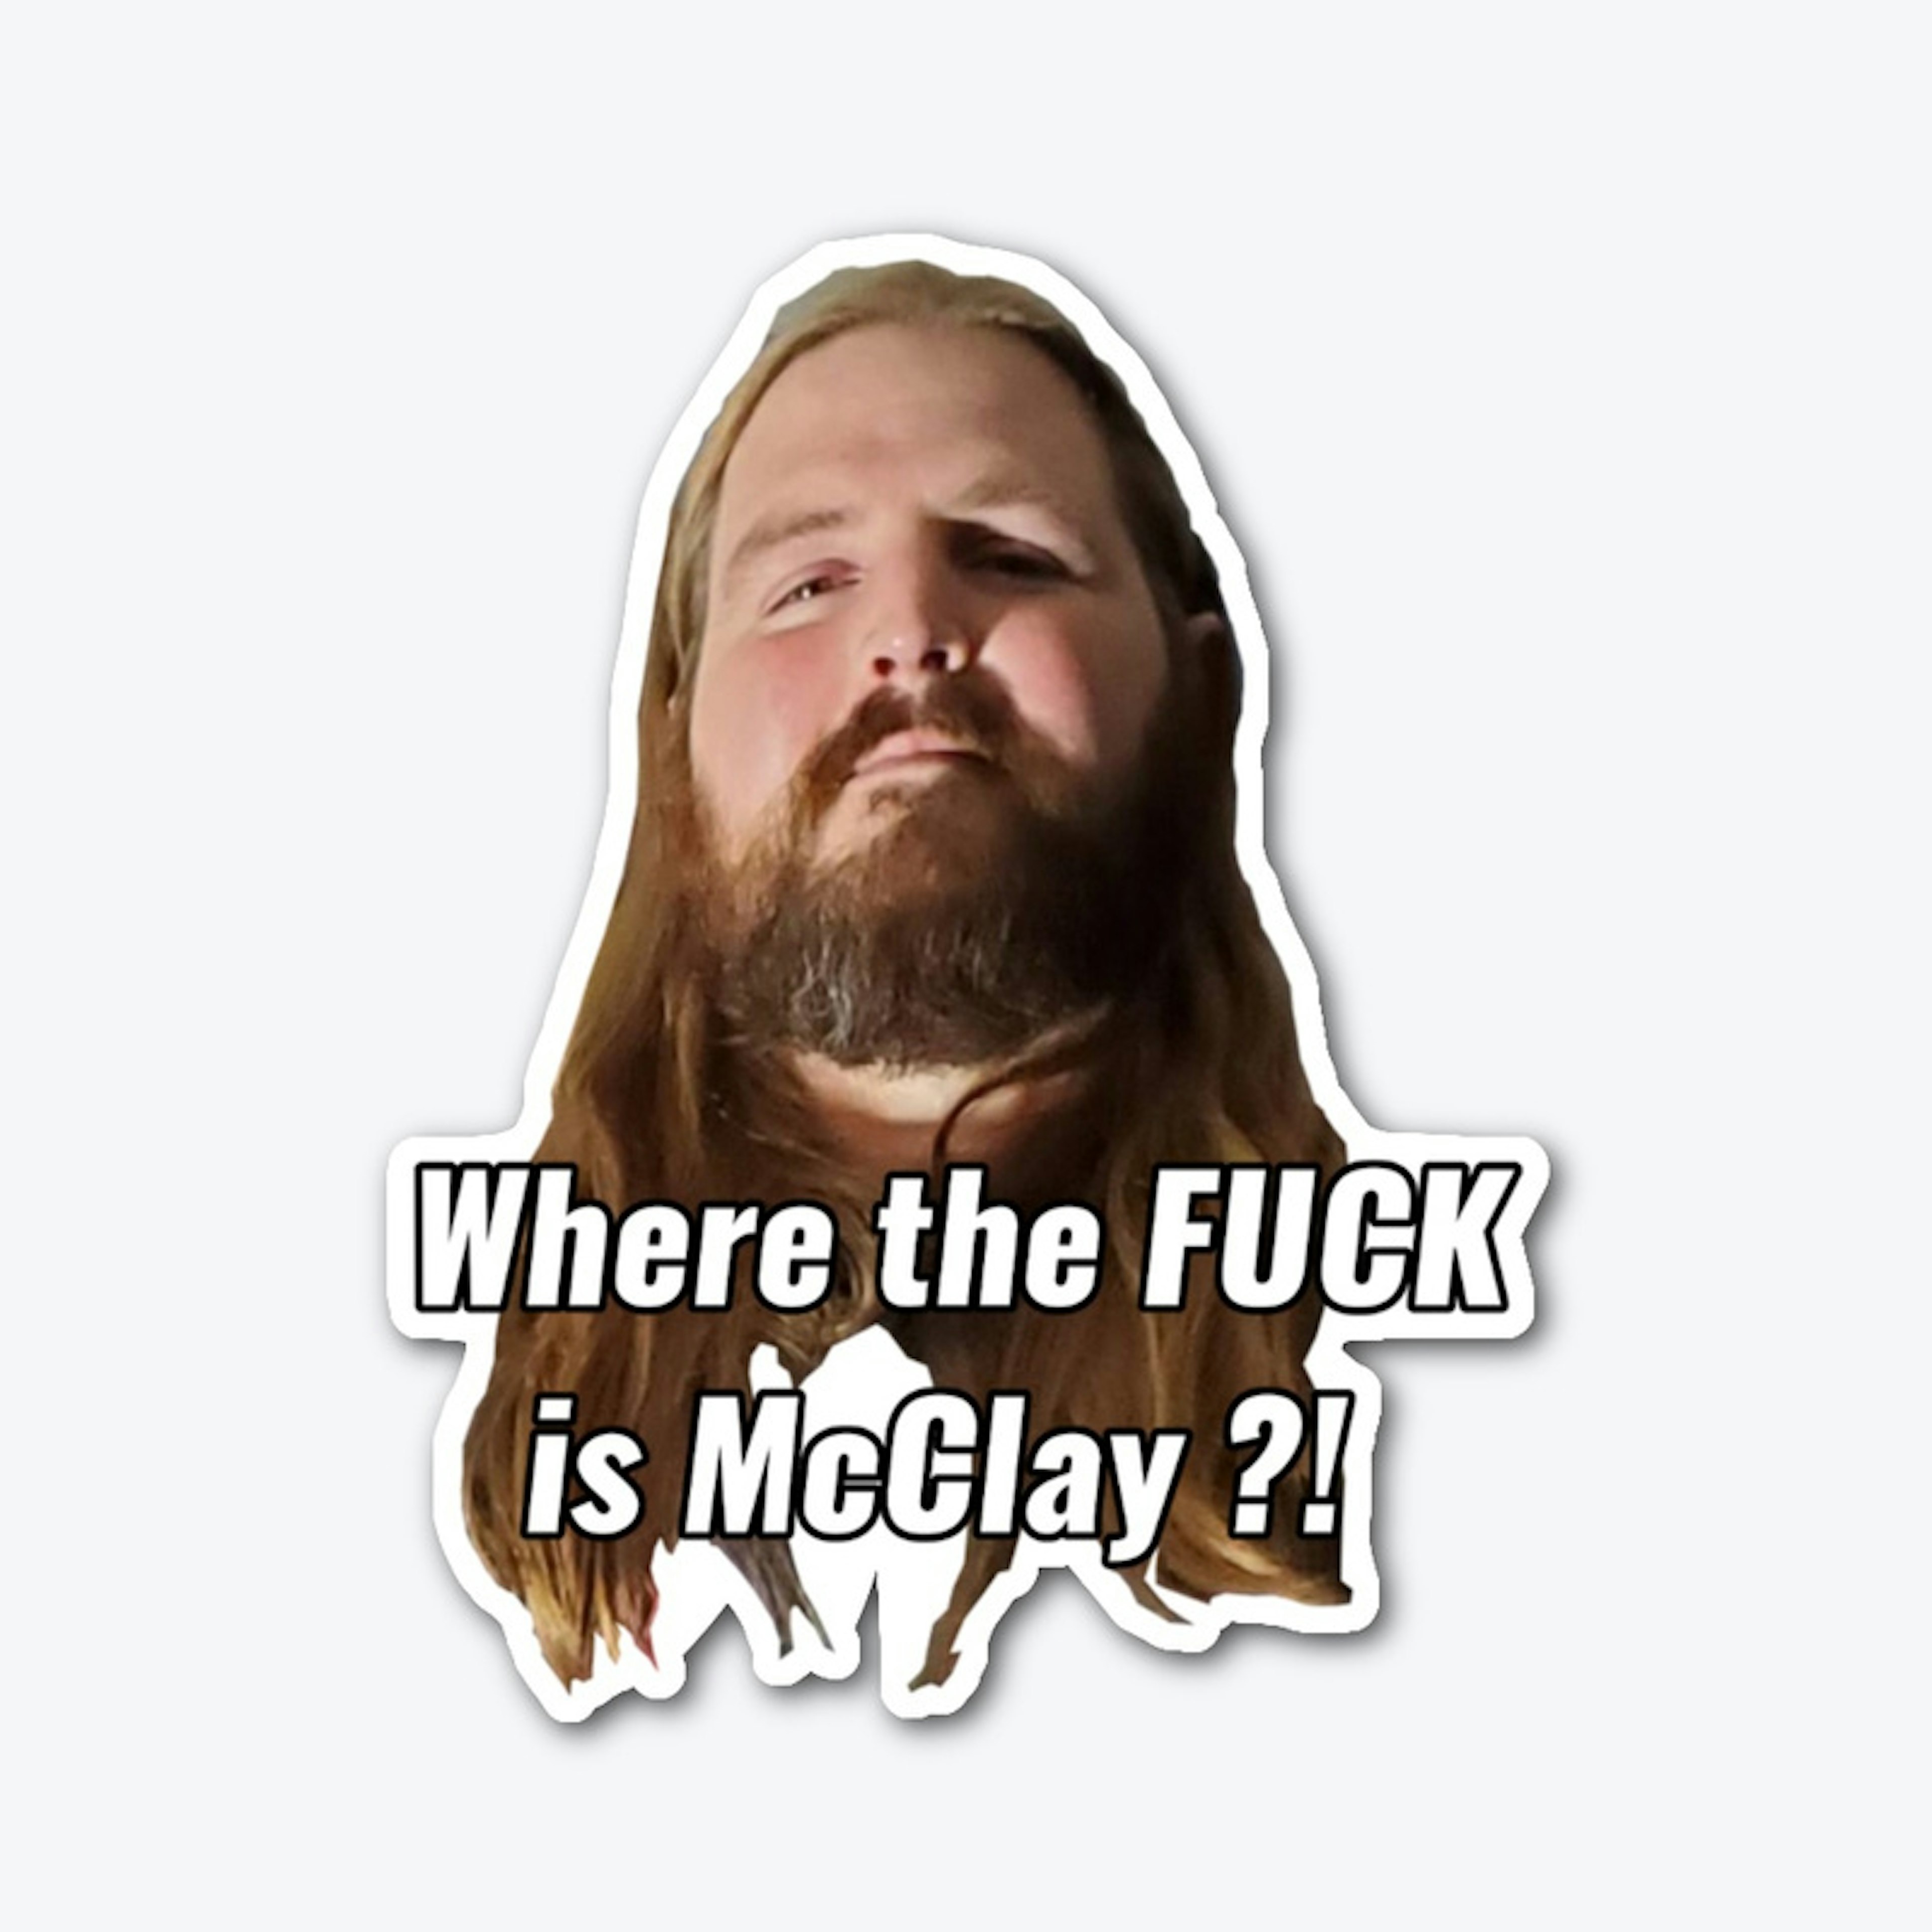 Where the fuck is McClay?